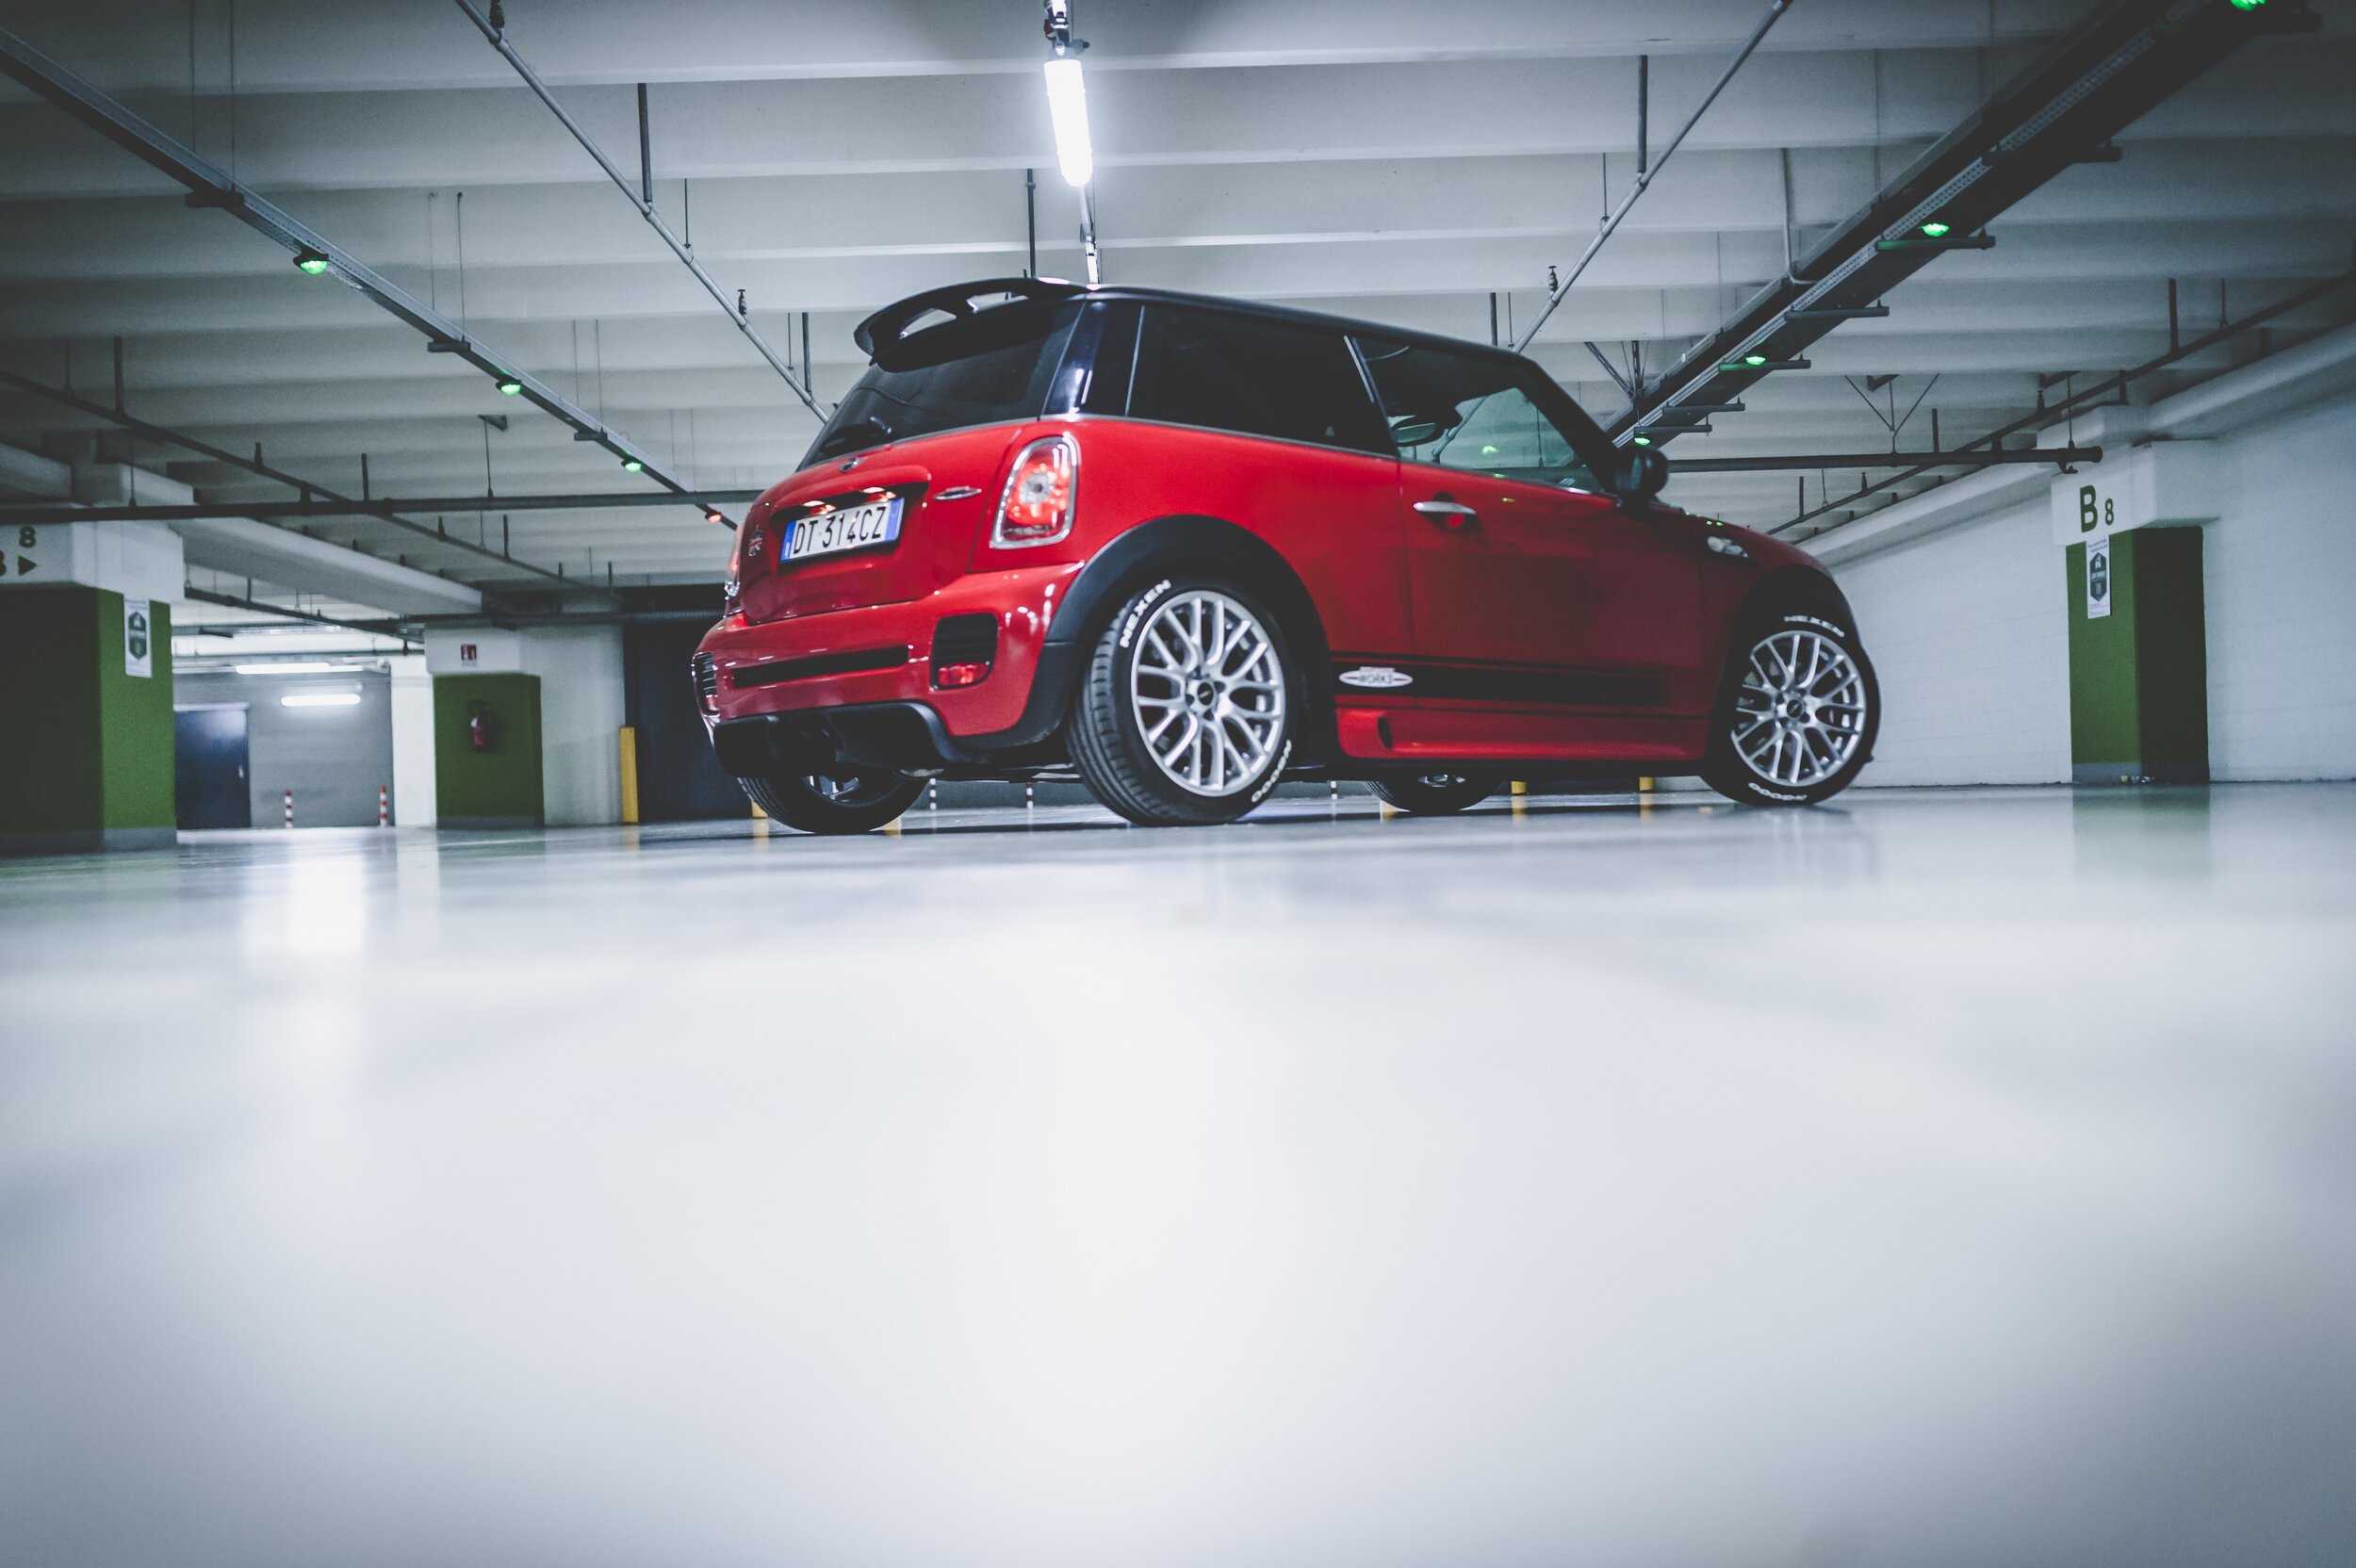 mini-cooper-automobile-automotive-red-valley-eurotec-automotive-repair-red.jpg